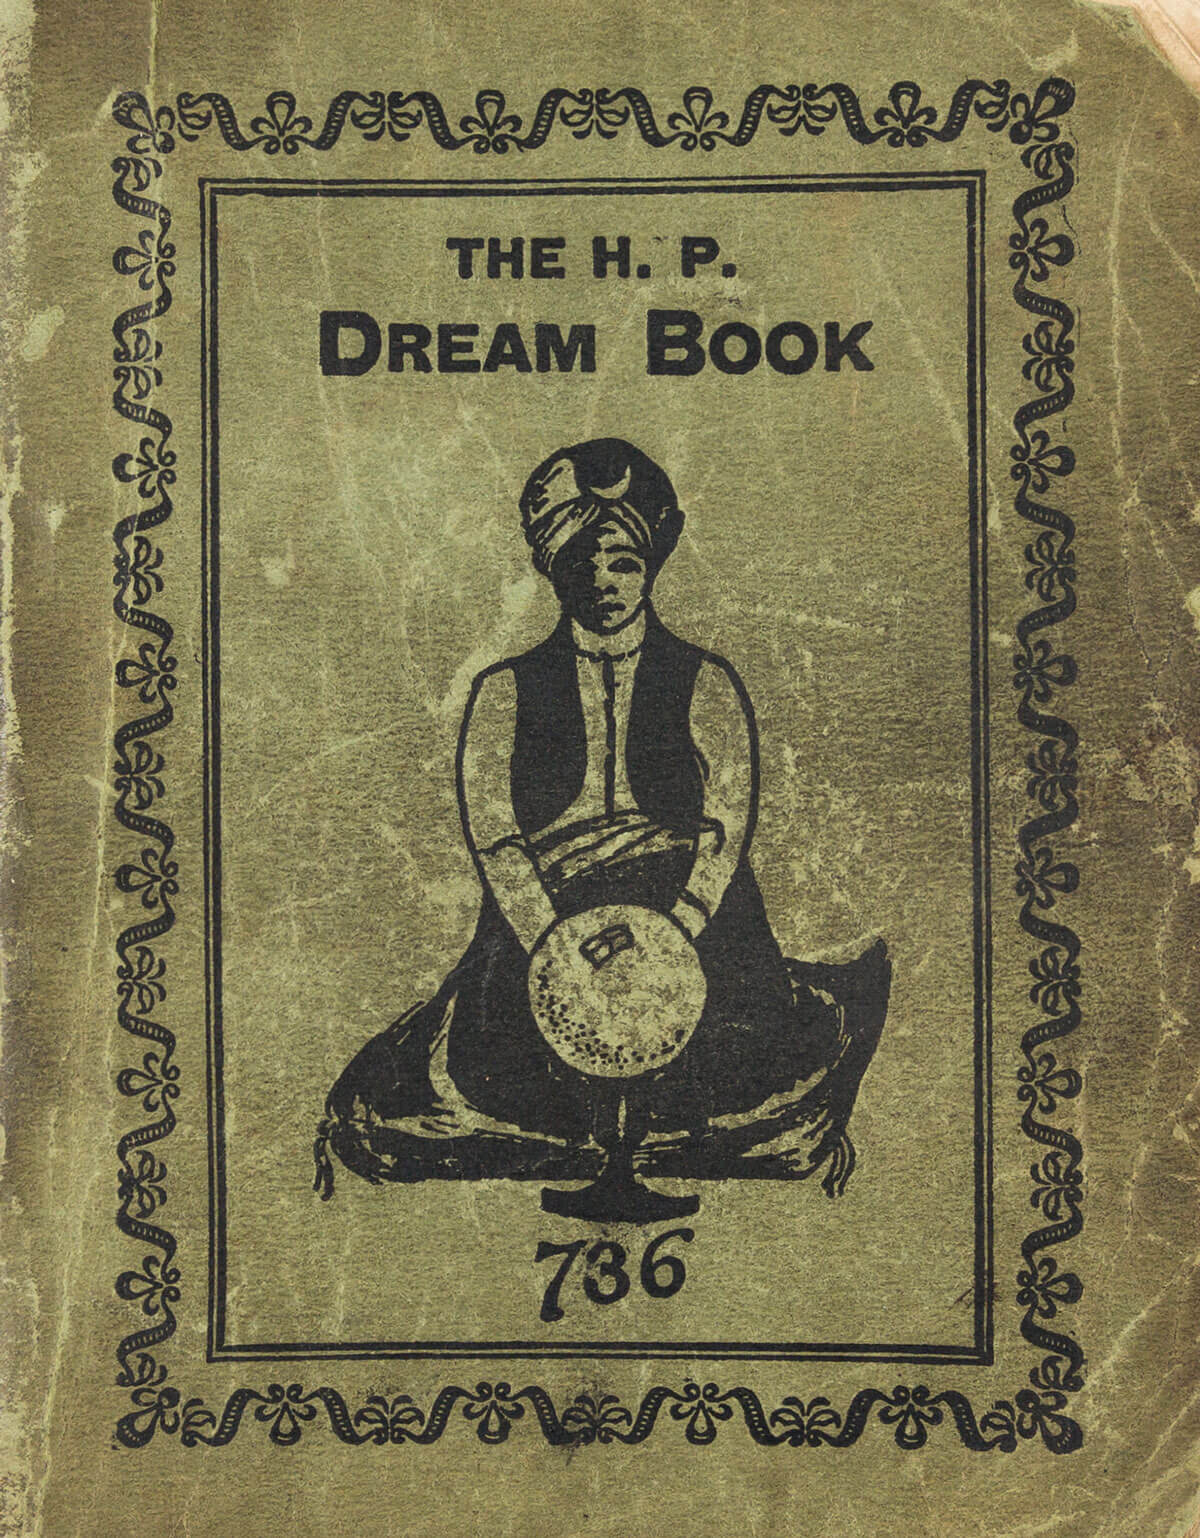 The front cover of “The H. P. Dream Book“, published in nineteen twenty-six by G. Parris Company, depicting a fakir seated before a “looking-glass” and, beneath him, the number 736. The book’s entries for “looking-glass,” “Hindoo,” “dream book,” and “Prof. Konje,” are all similarly associated with the number 736.